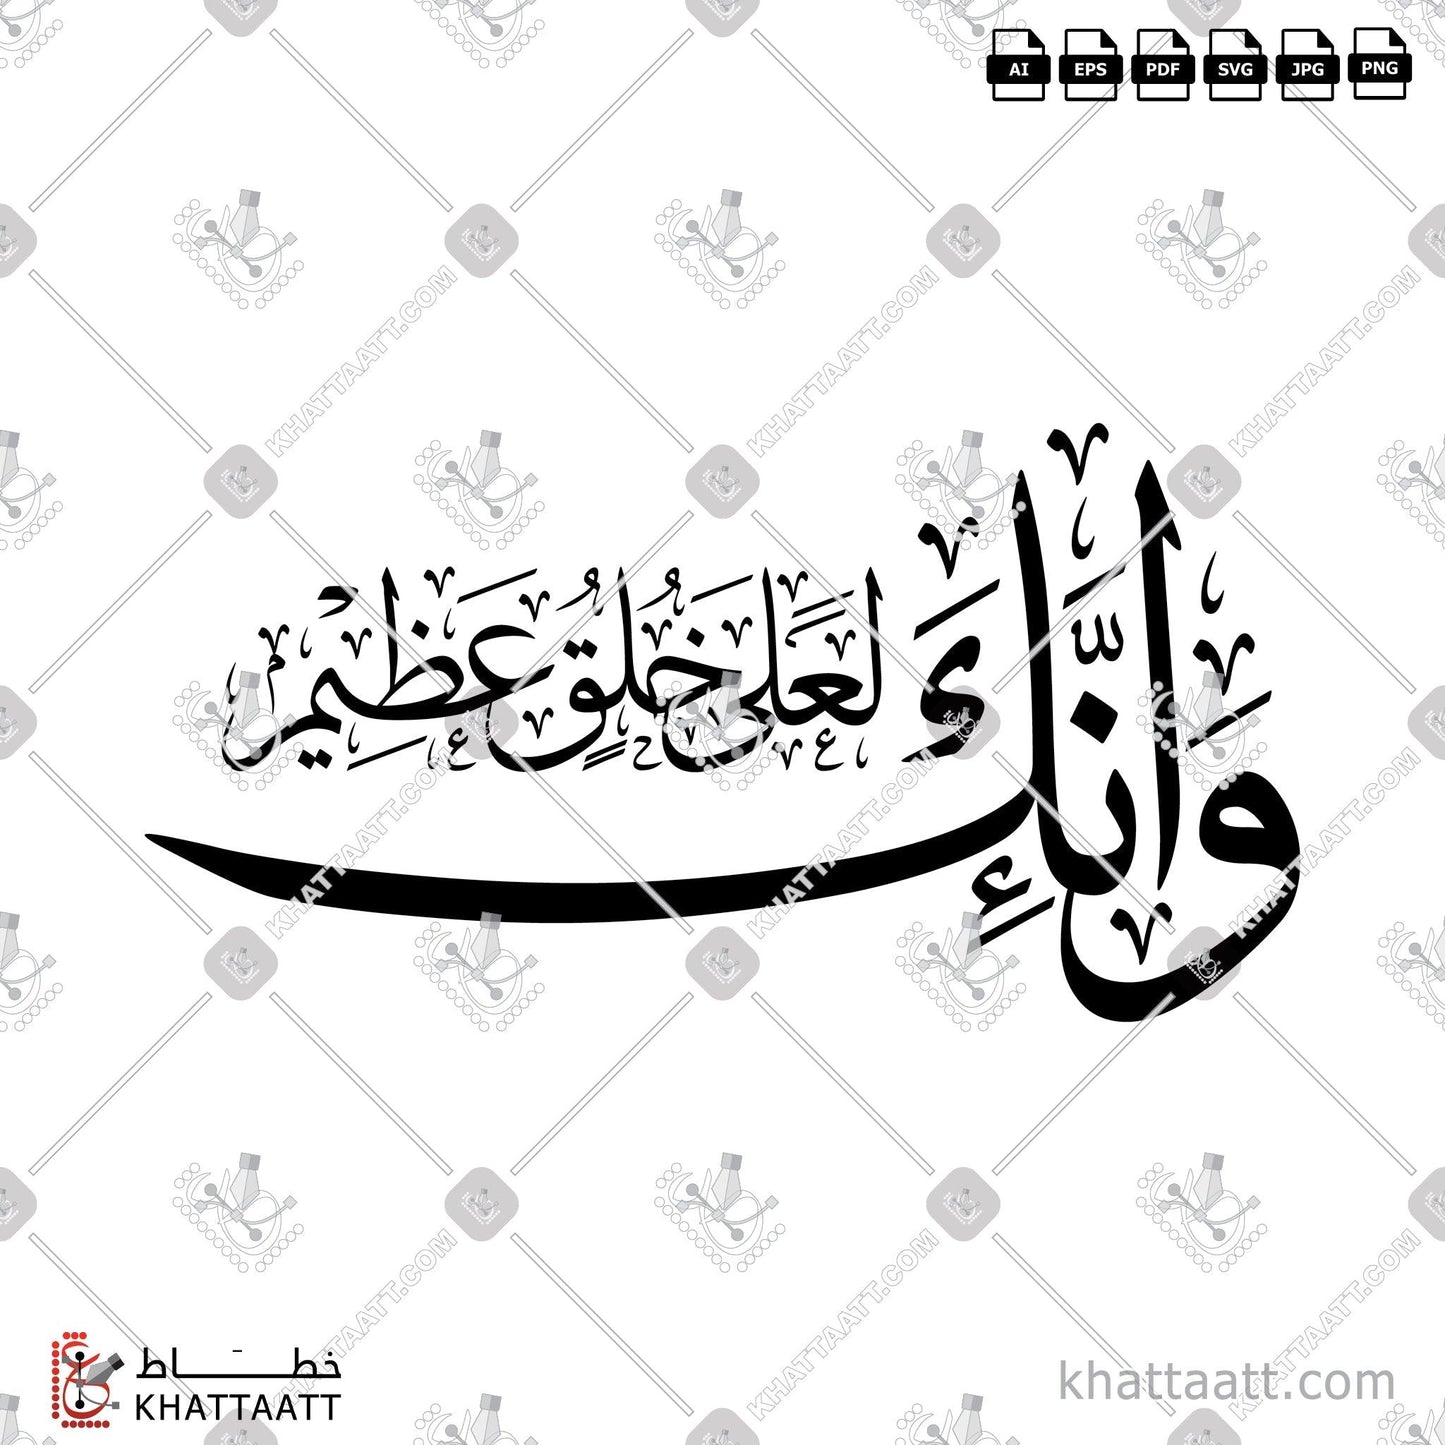 Download Arabic Calligraphy of وإنك لعلى خلق عظيم in Thuluth - خط الثلث in vector and .png